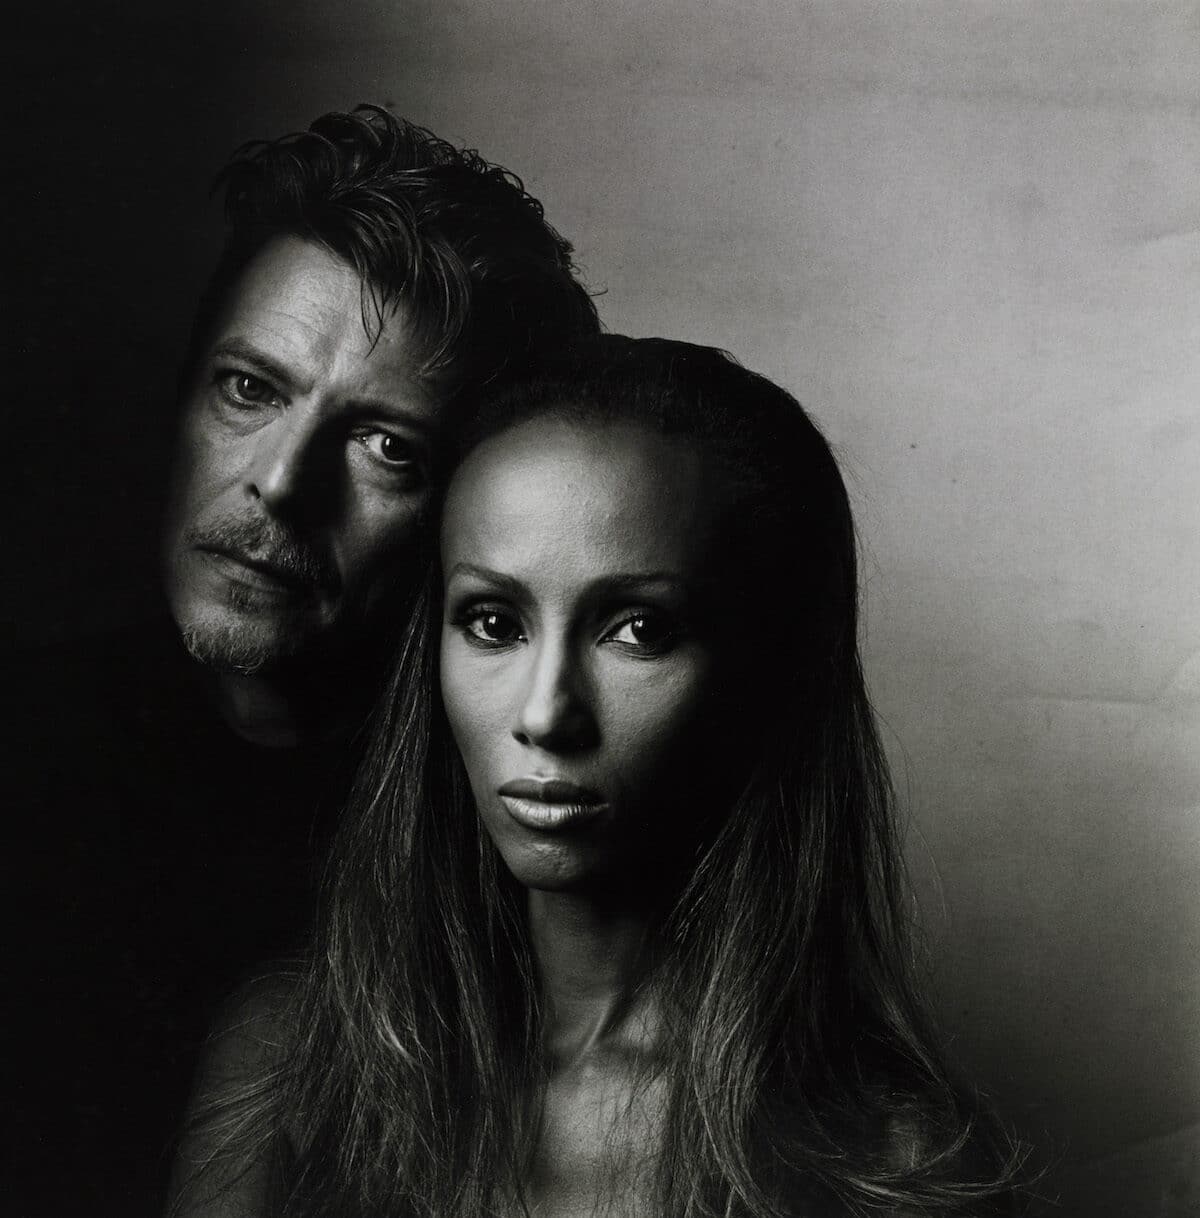 David Bowie and Iman, 1994 © Irving Penn / Condé Nast Pinault Collection